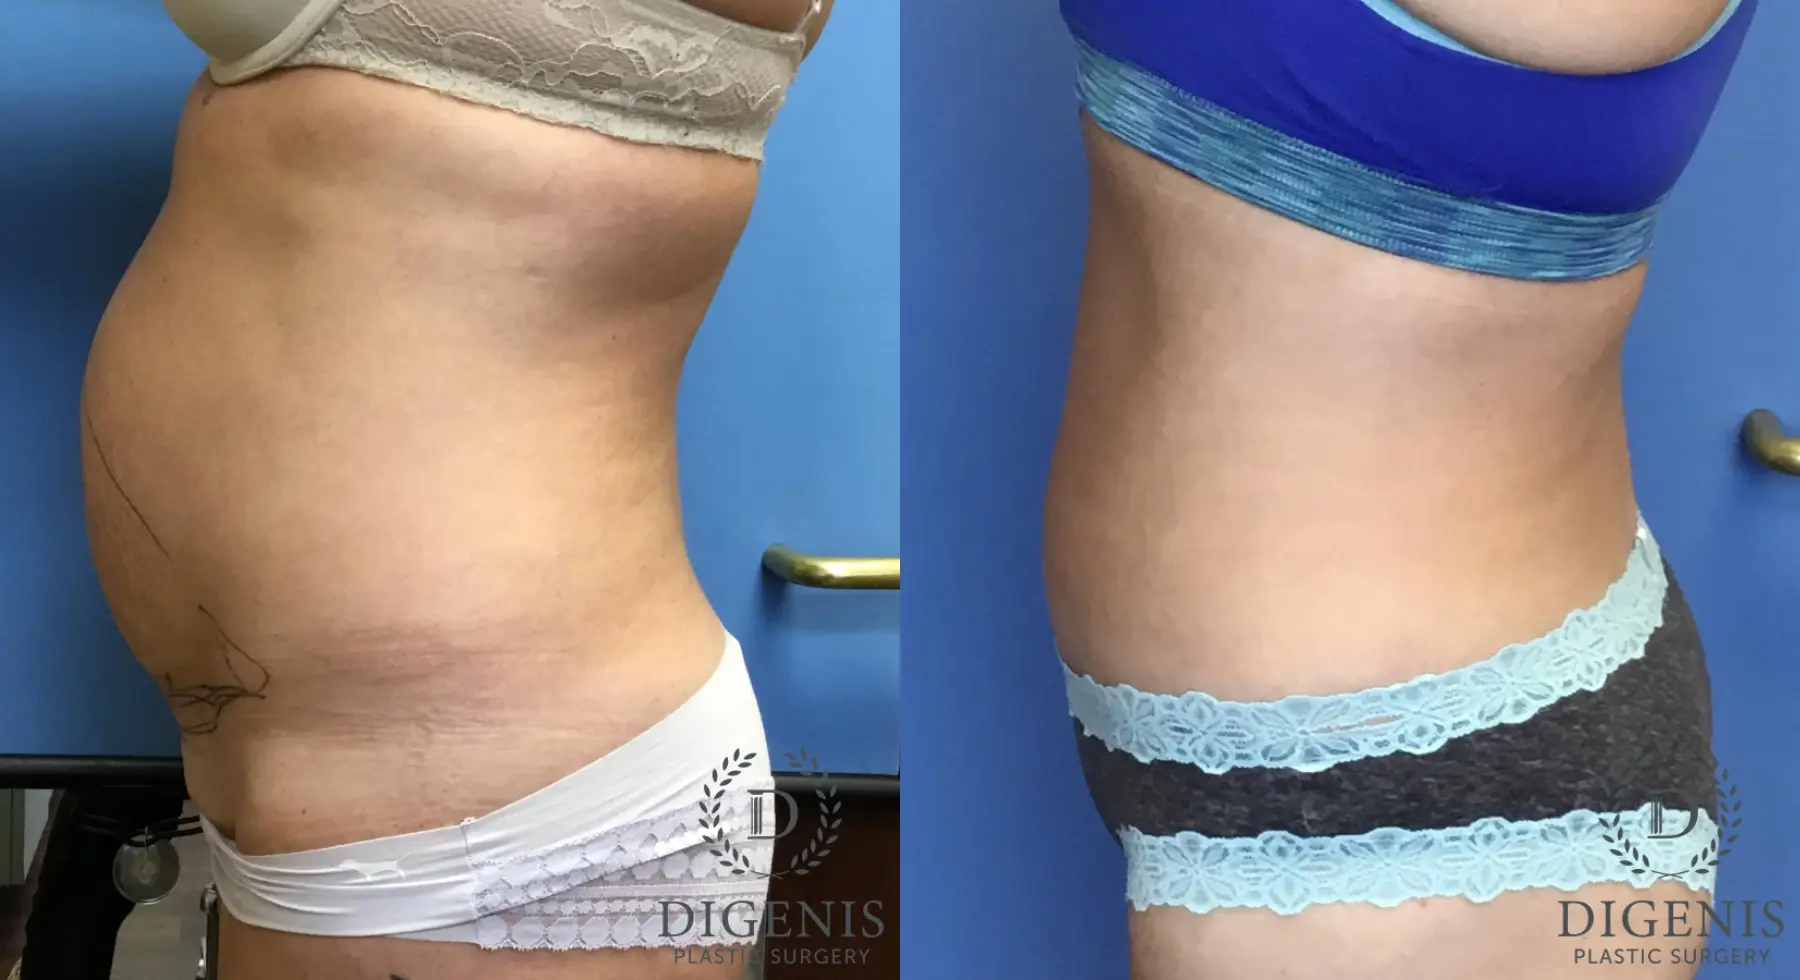 Abdominoplasty: Patient 3 - Before and After 4